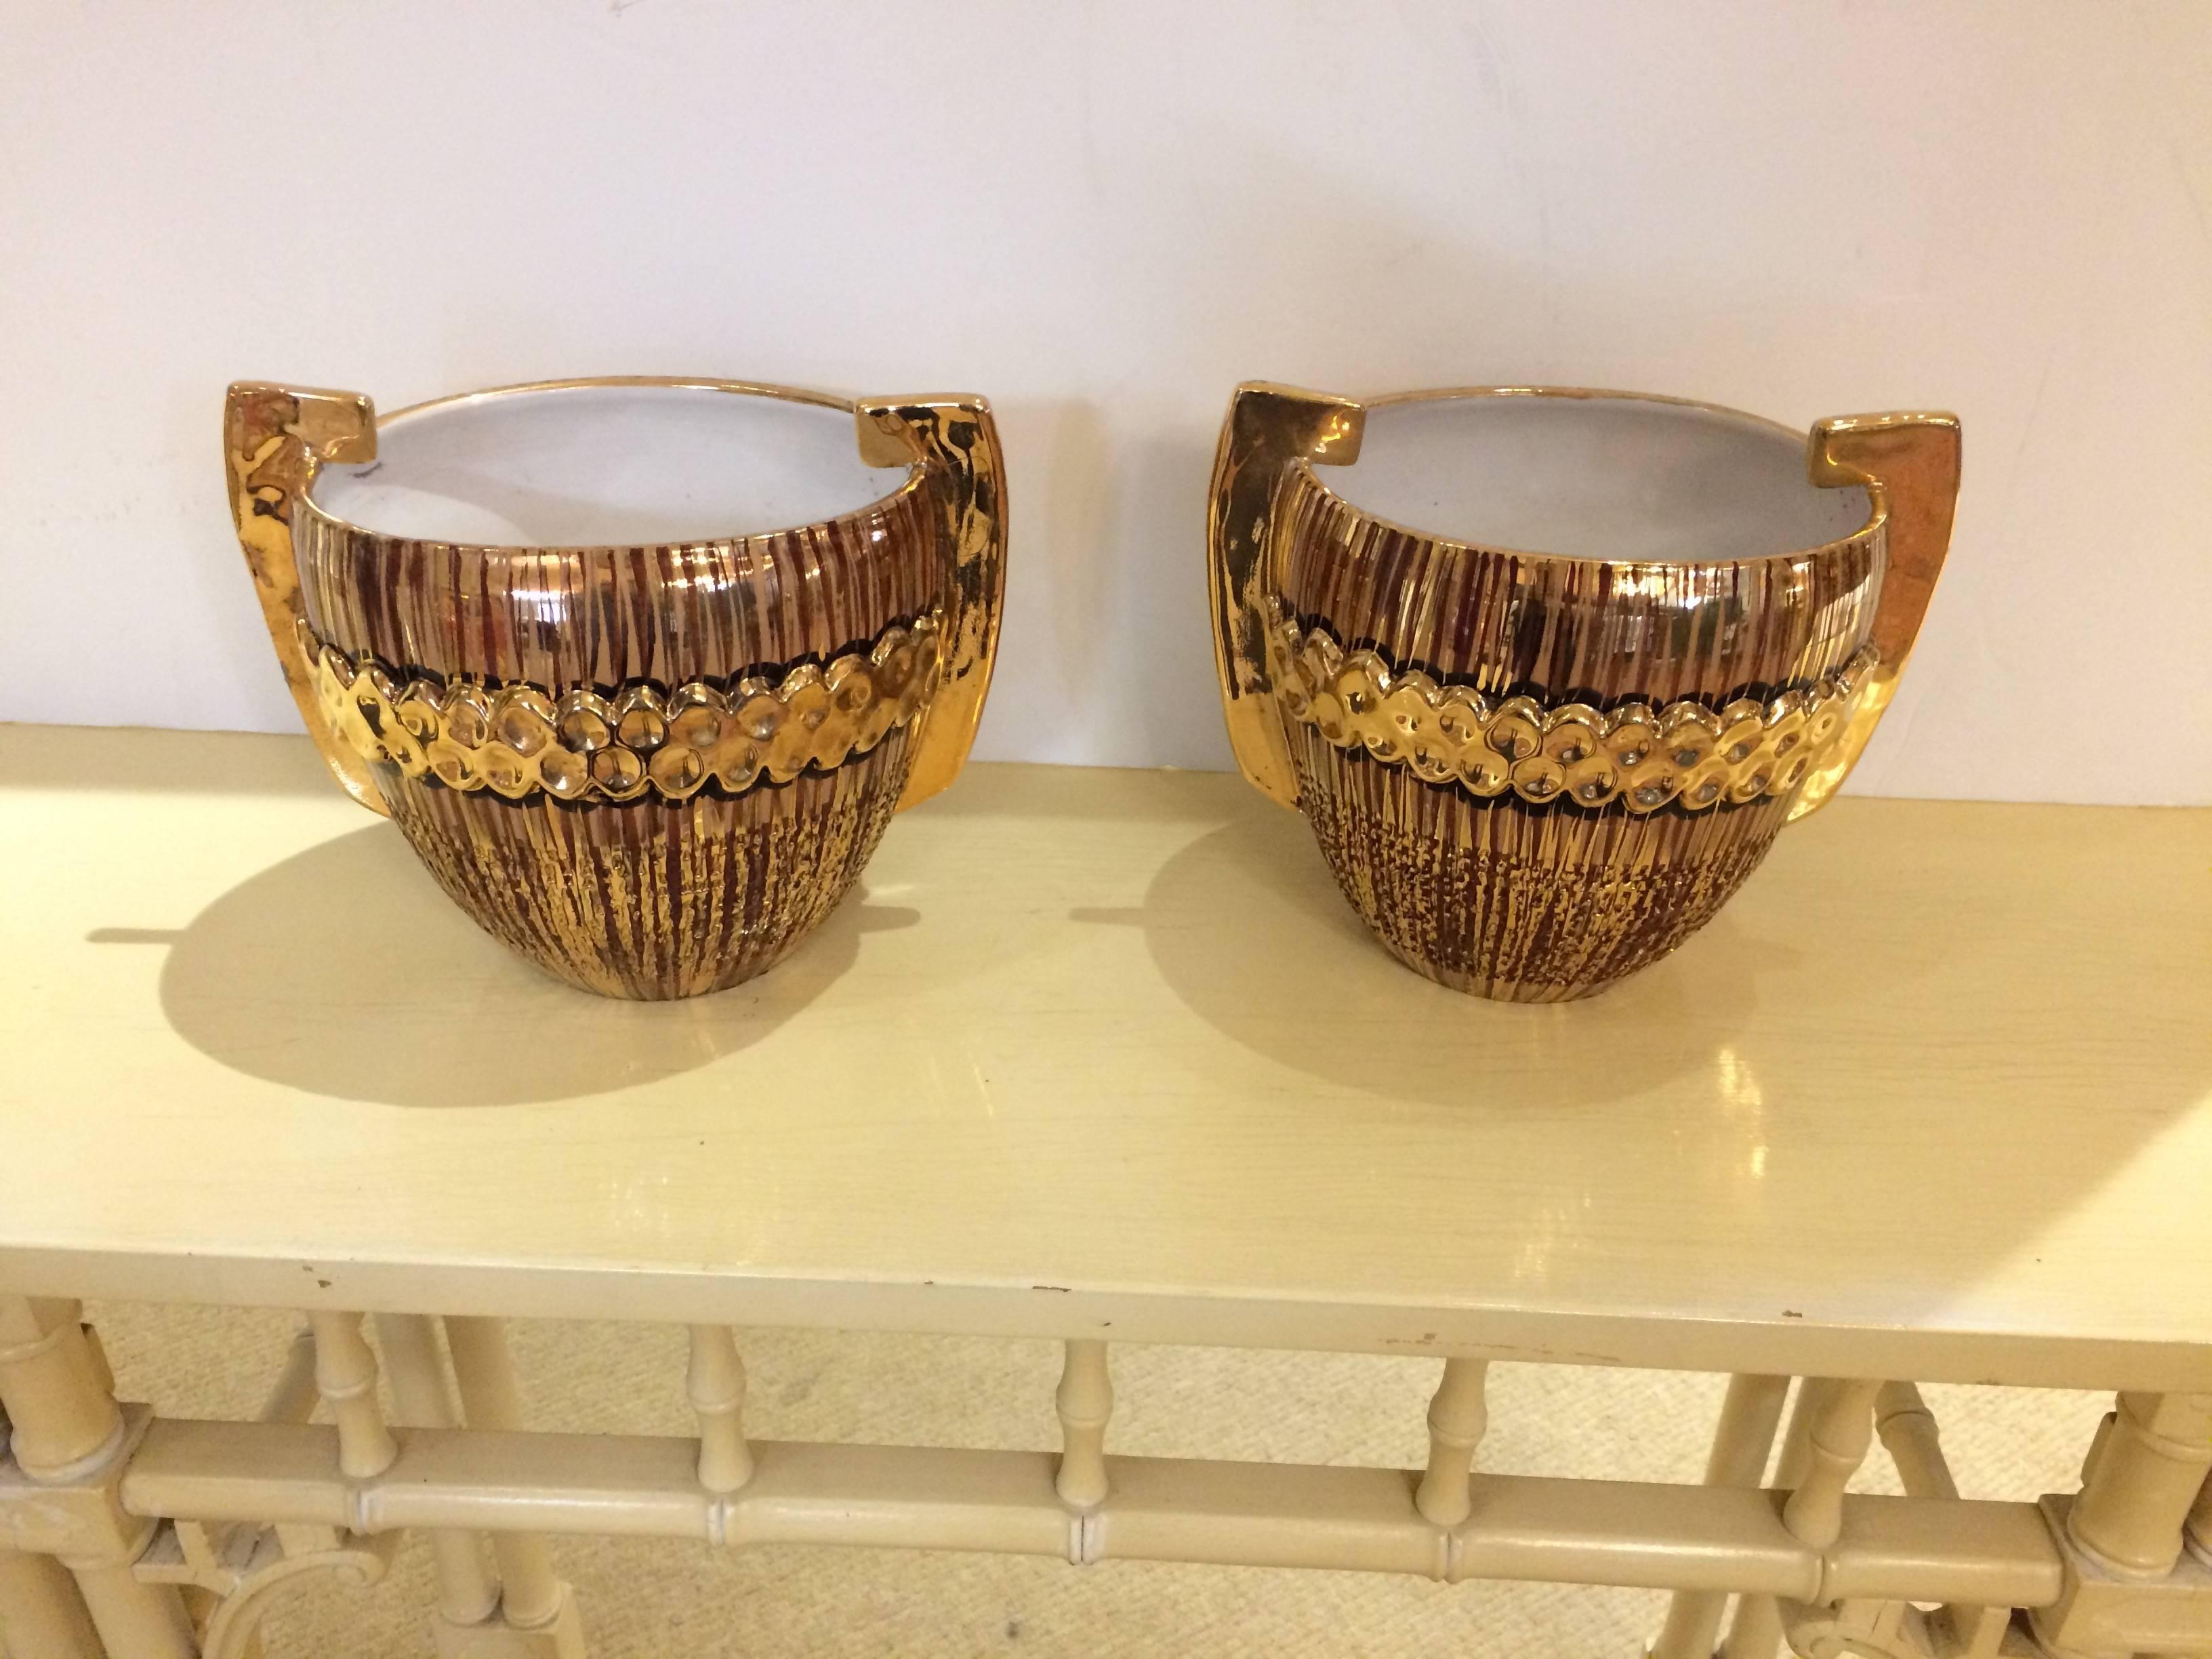 Two eye-catching Italian cachepots, planters, or beautiful accessory pottery having a glamorous gilded glaze and handles.